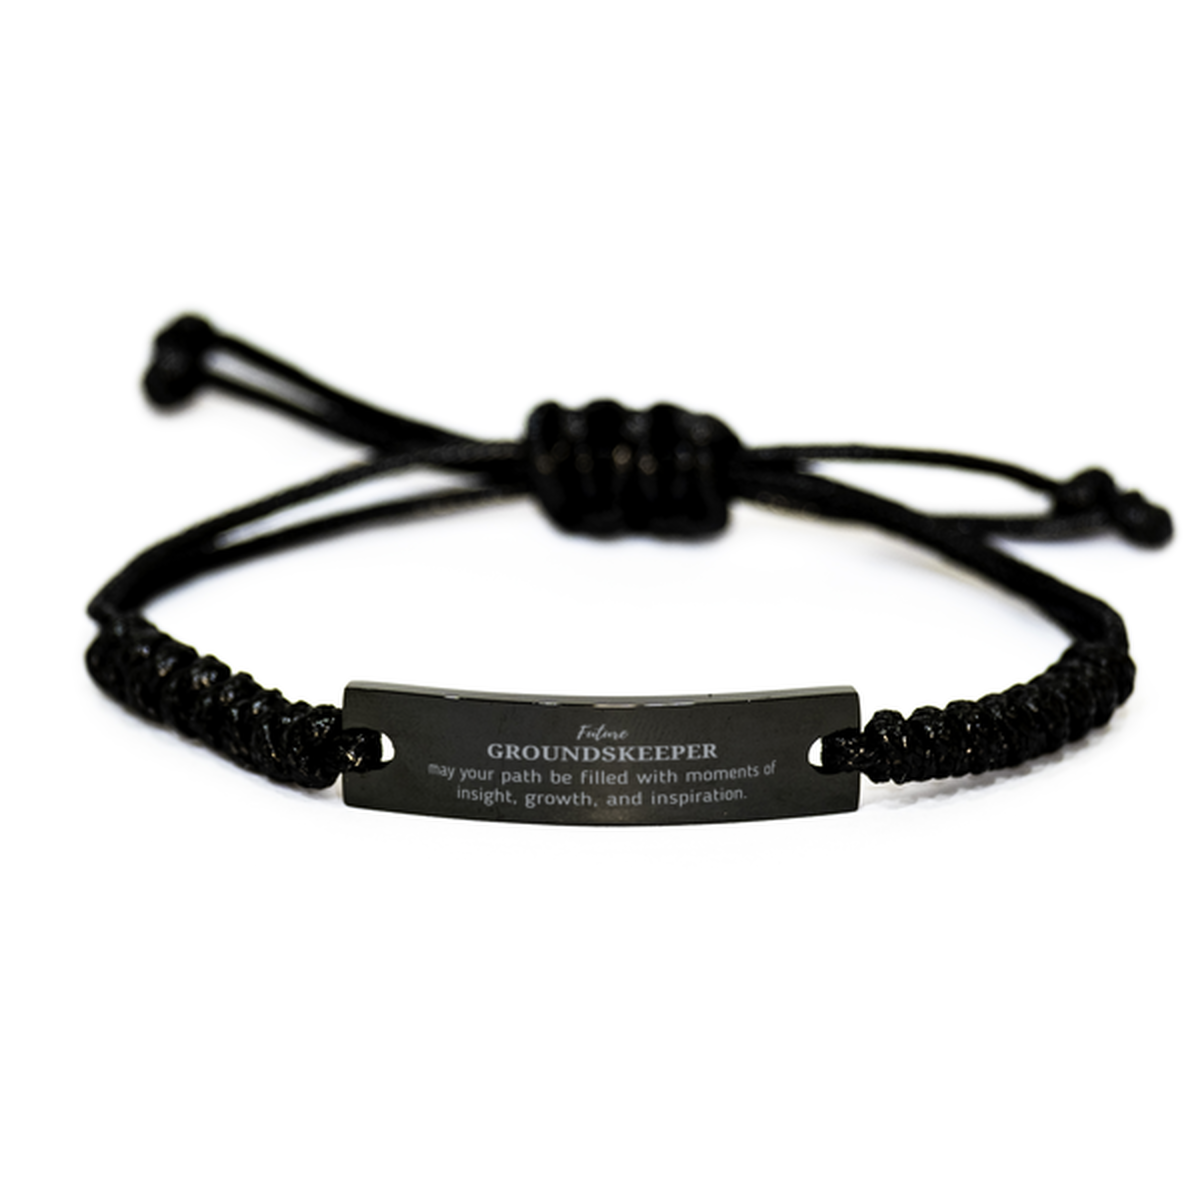 Future Groundskeeper Gifts, May your path be filled with moments of insight, Graduation Gifts for New Groundskeeper, Christmas Unique Black Rope Bracelet For Men, Women, Friends